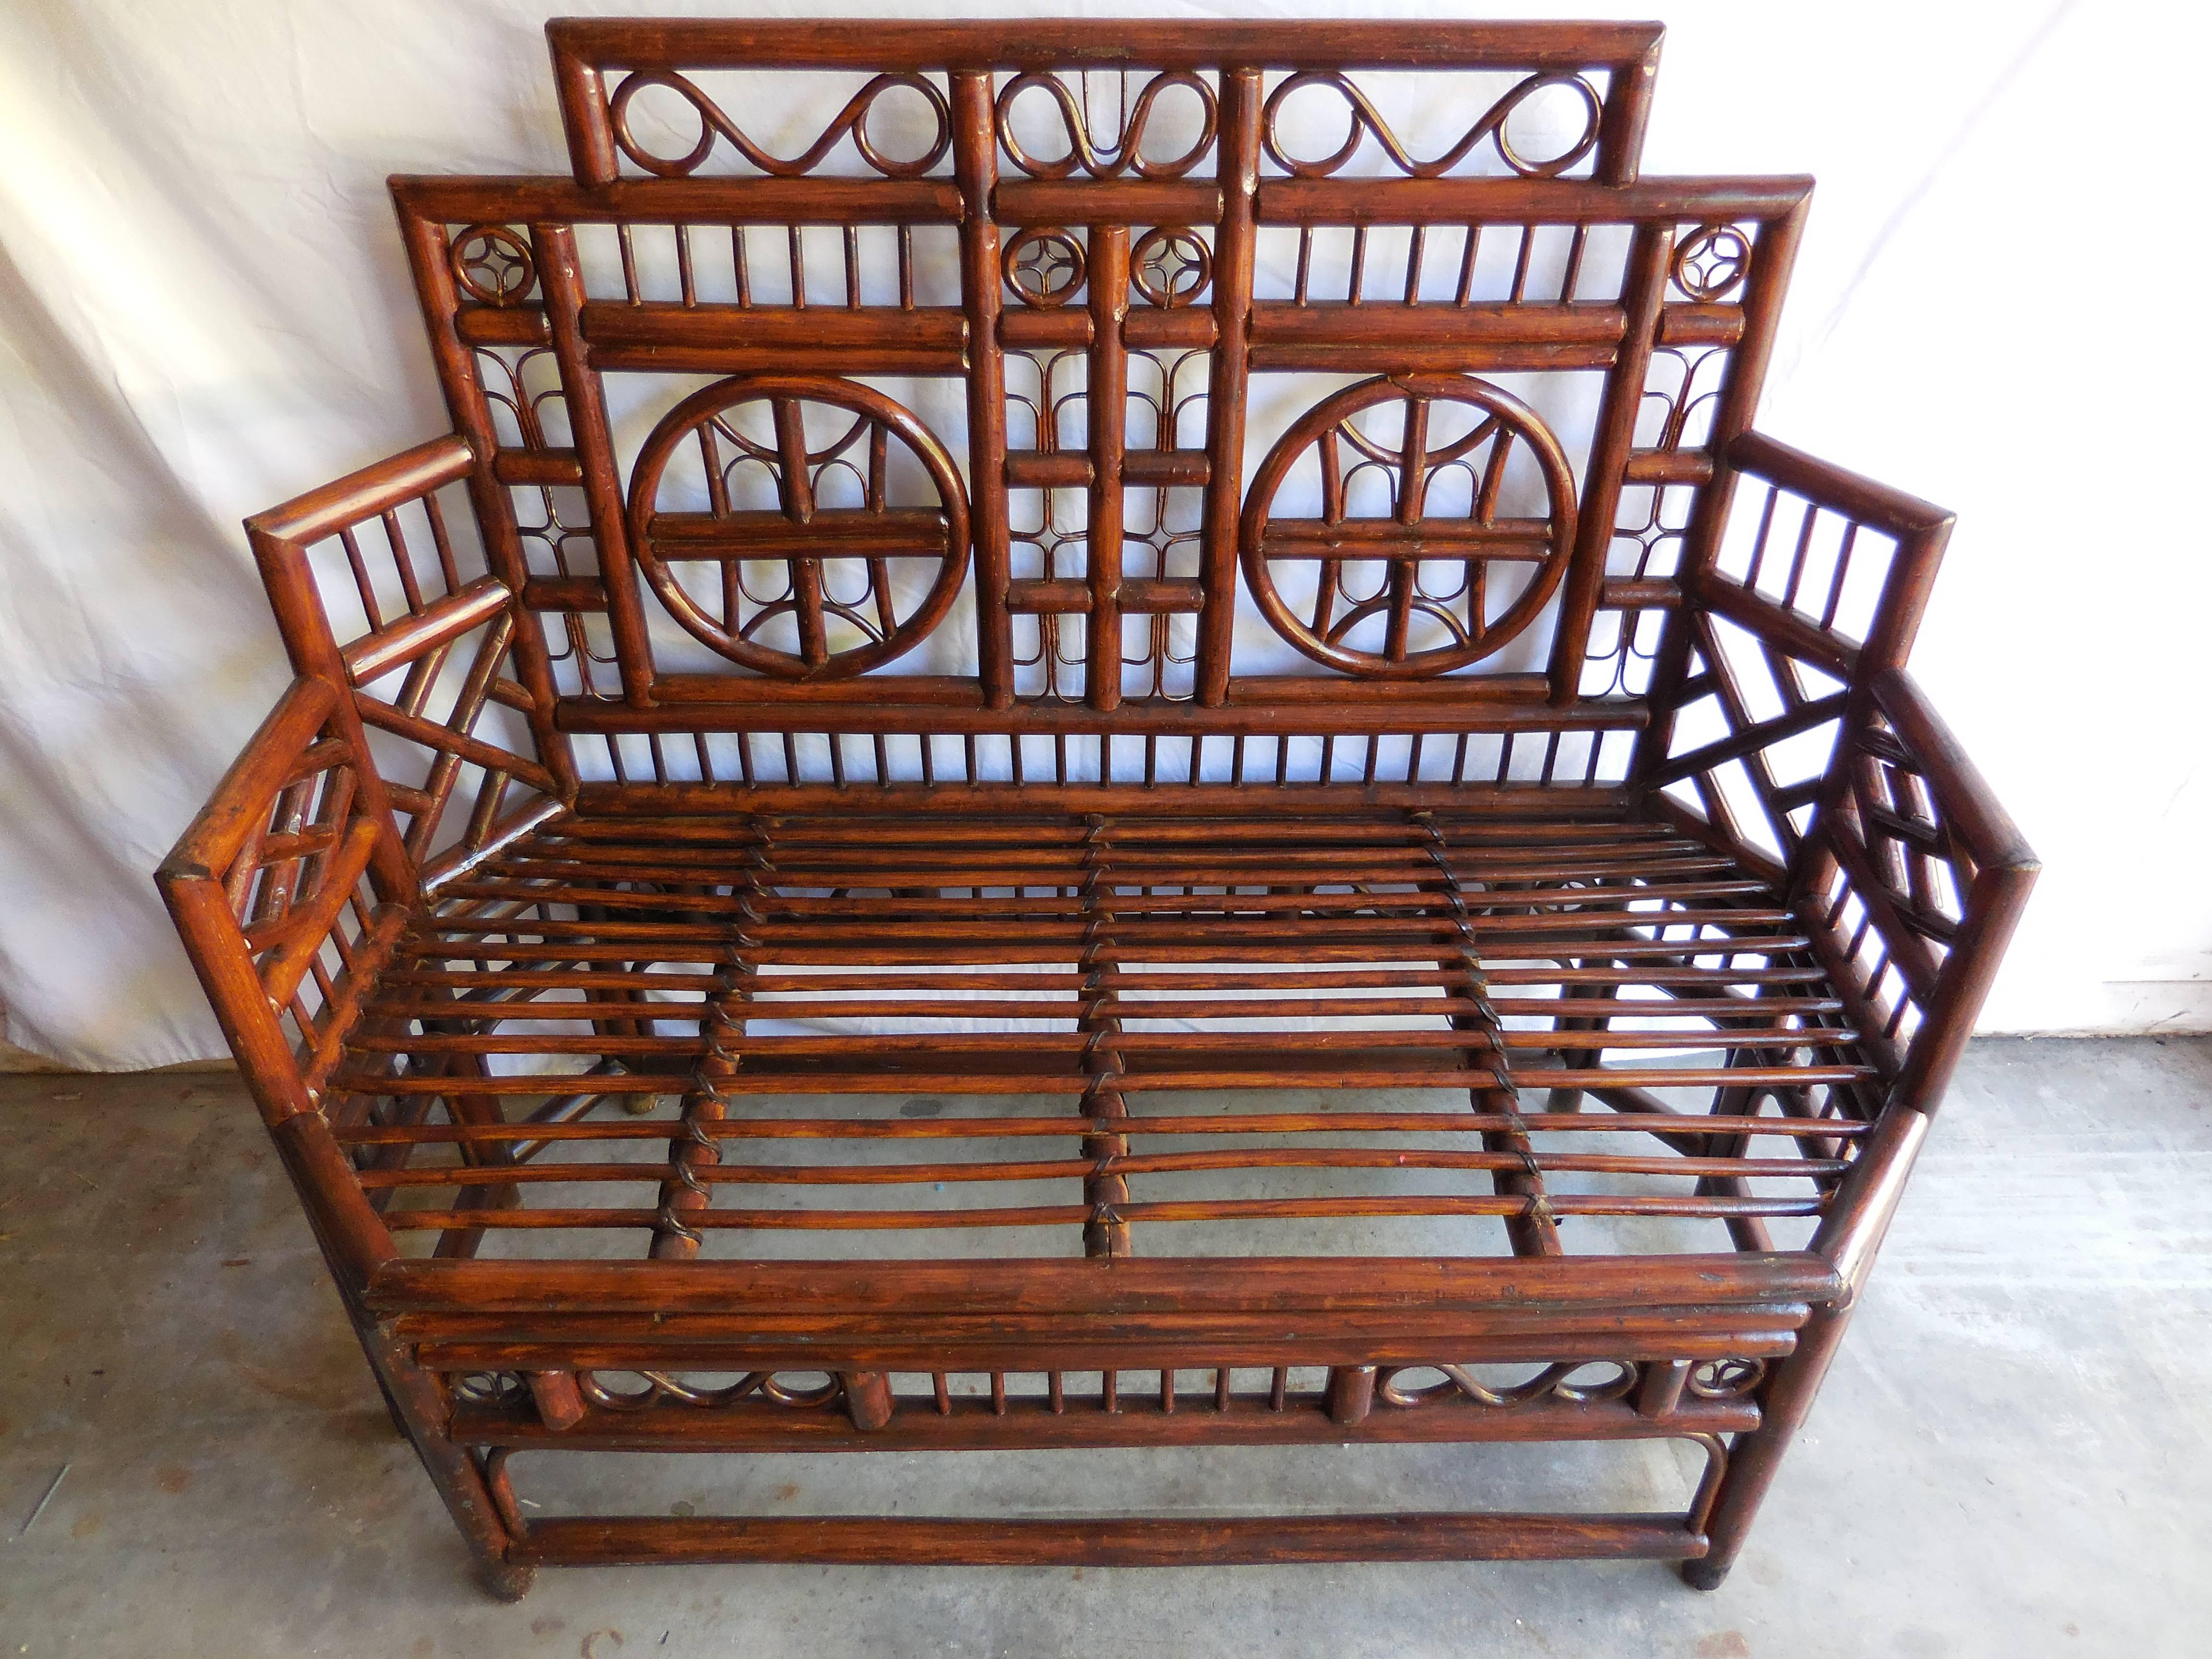 English bamboo settee in Pagoda style, circa 1920 and in excellent condition.